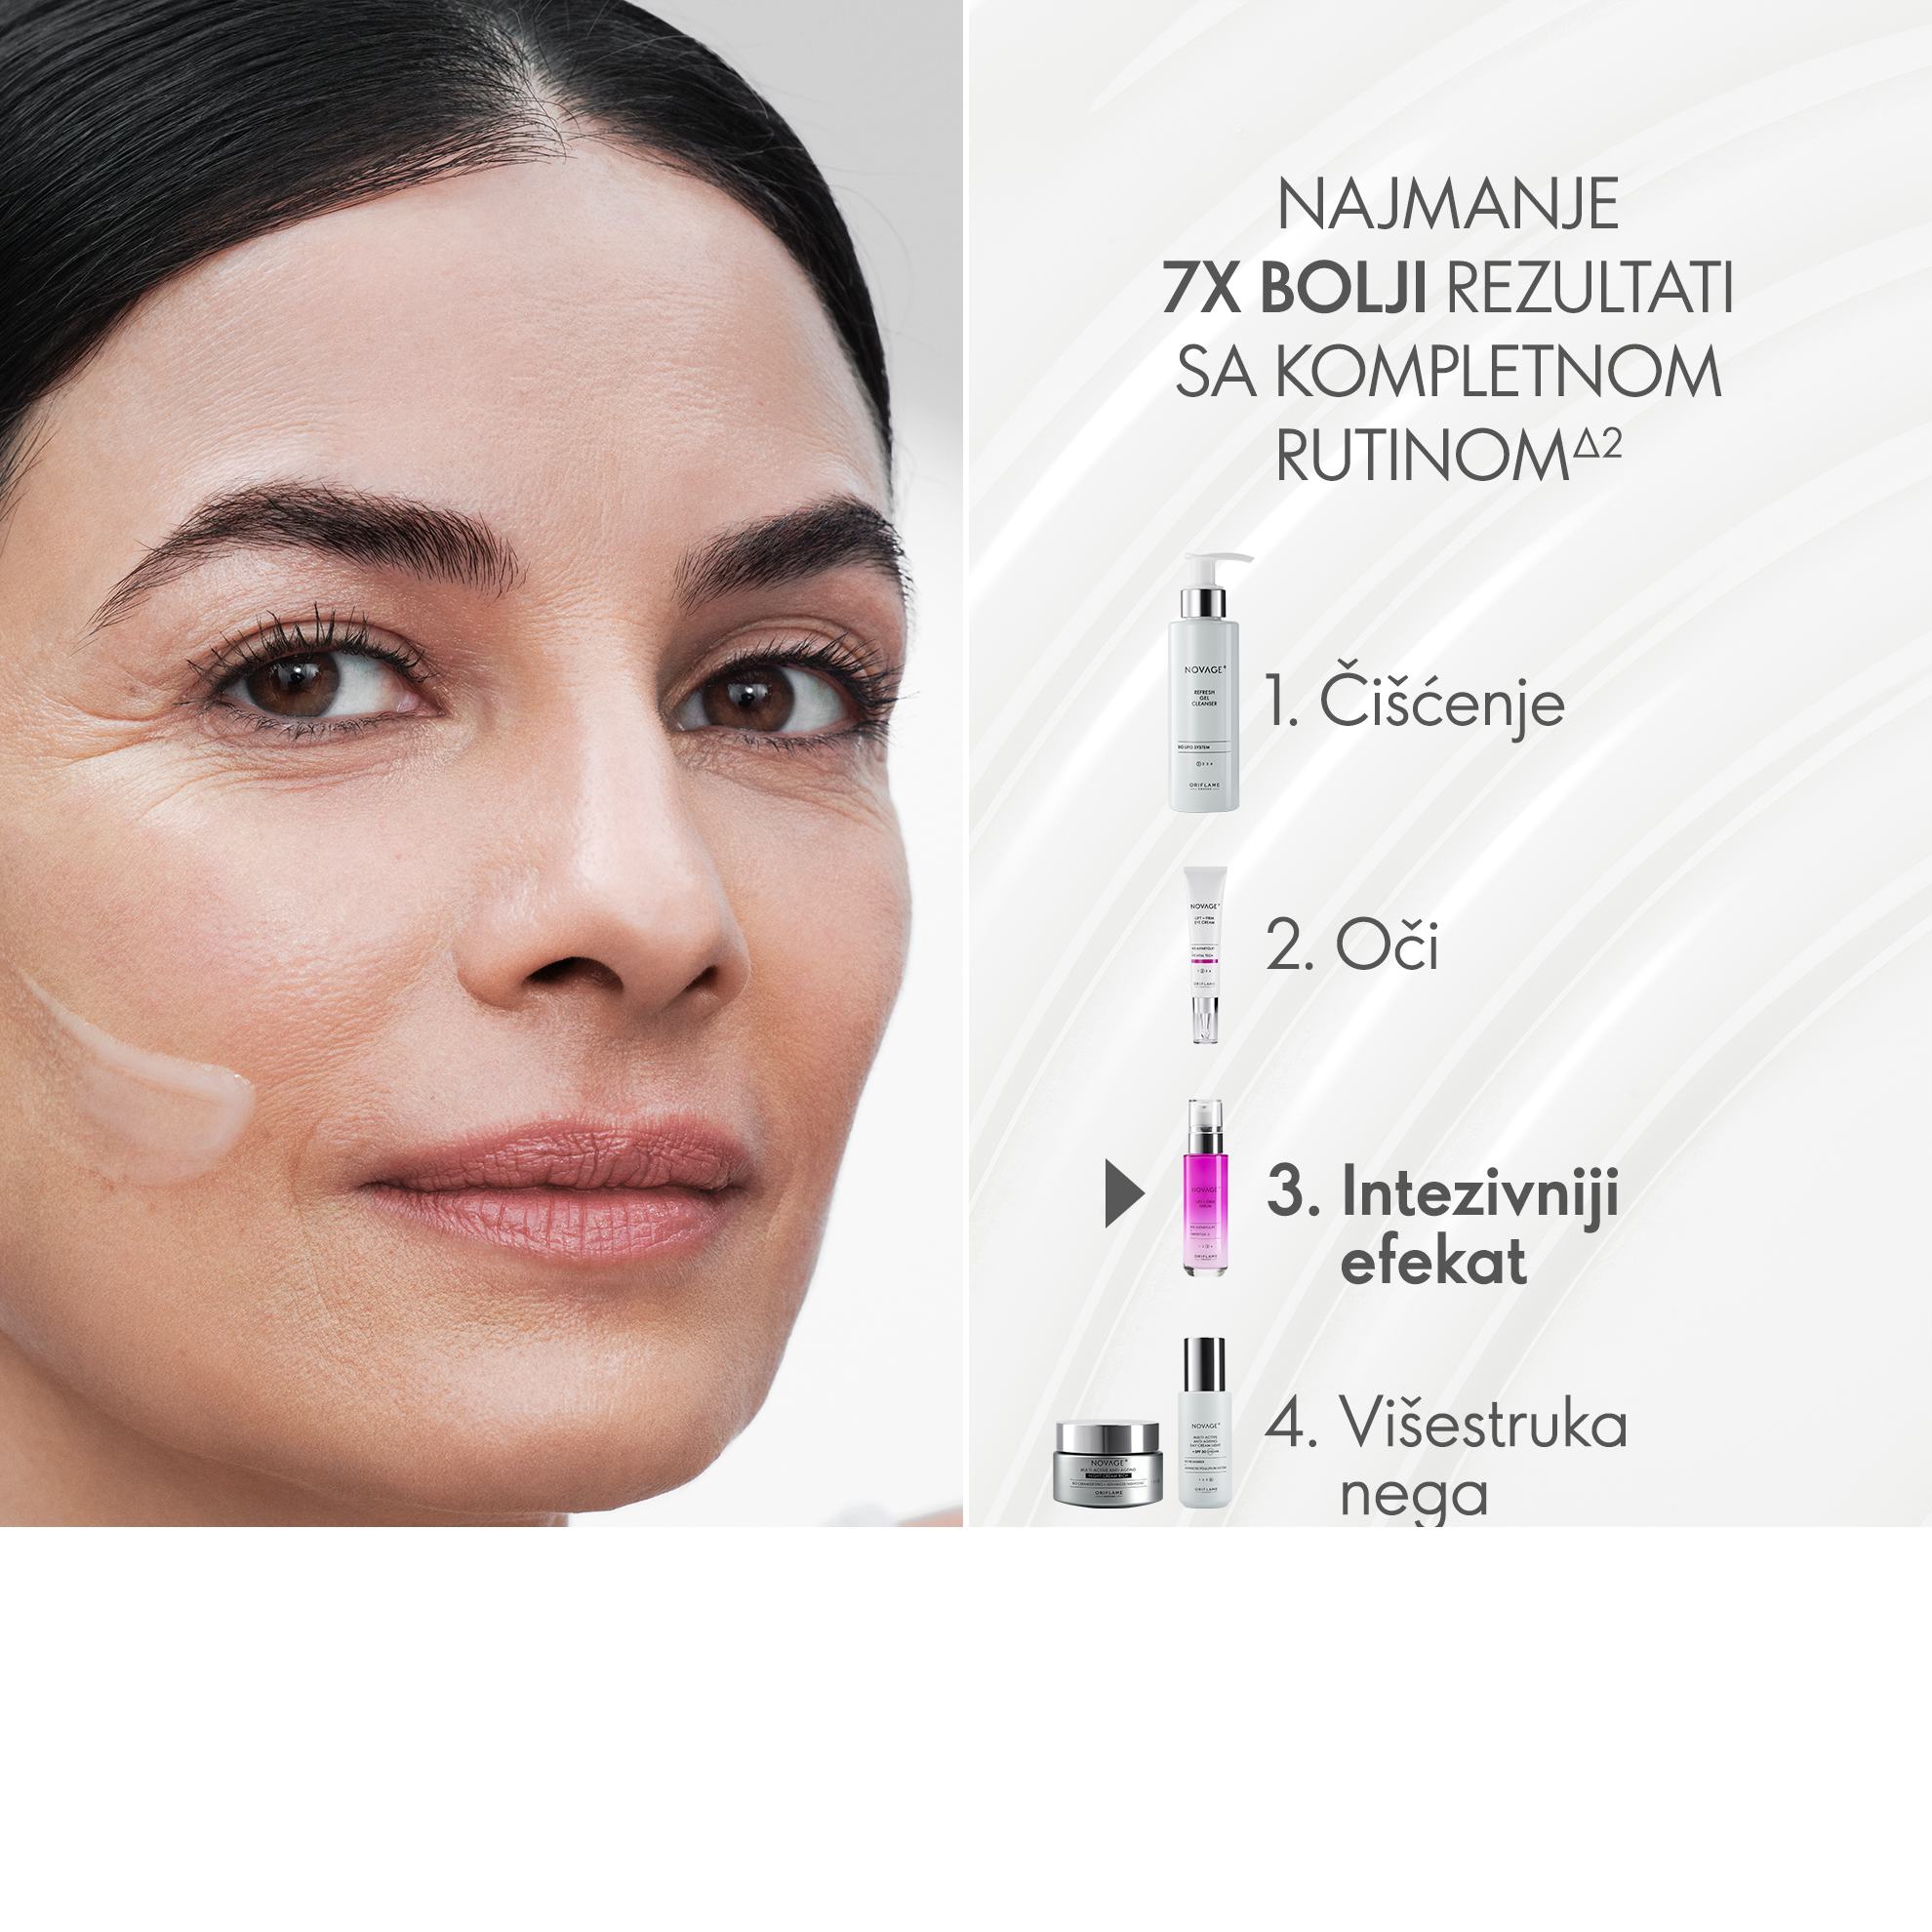 https://media-cdn.oriflame.com/productImage?externalMediaId=product-management-media%2fProducts%2f41037%2fRS%2f41037_3.png&id=17551255&version=2